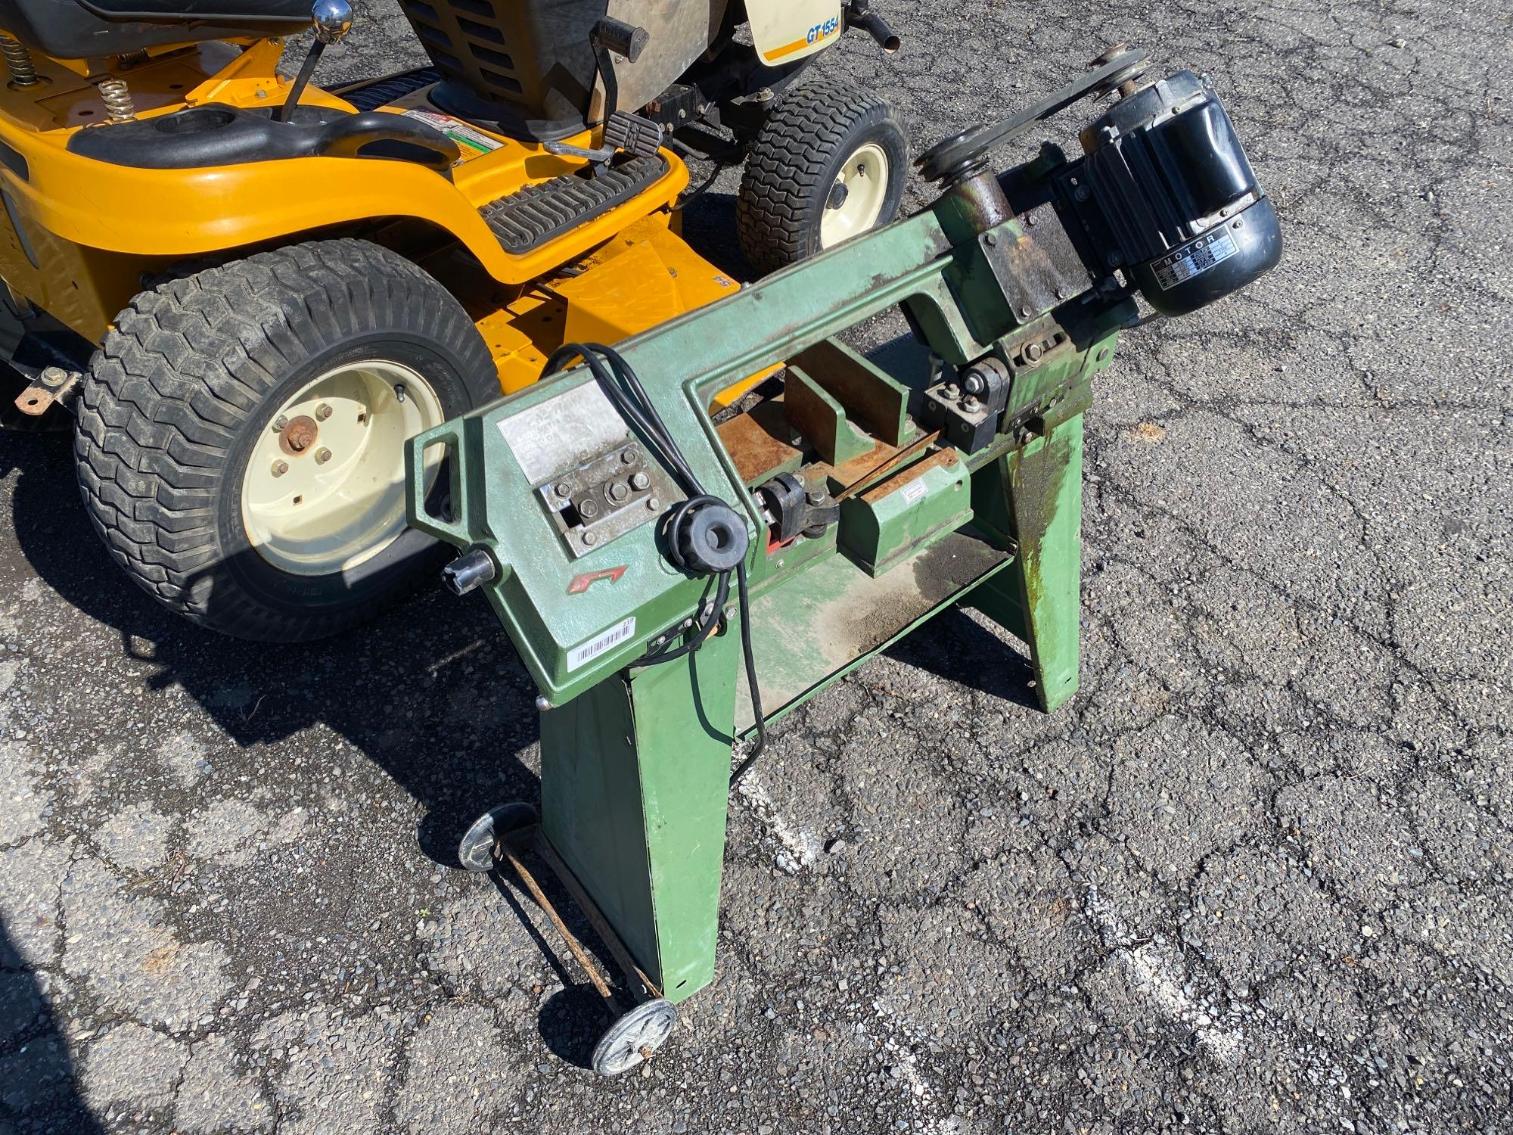 Image for Metal Cutting Band Saw, Per seller: Runs, may need a new blade and tune up